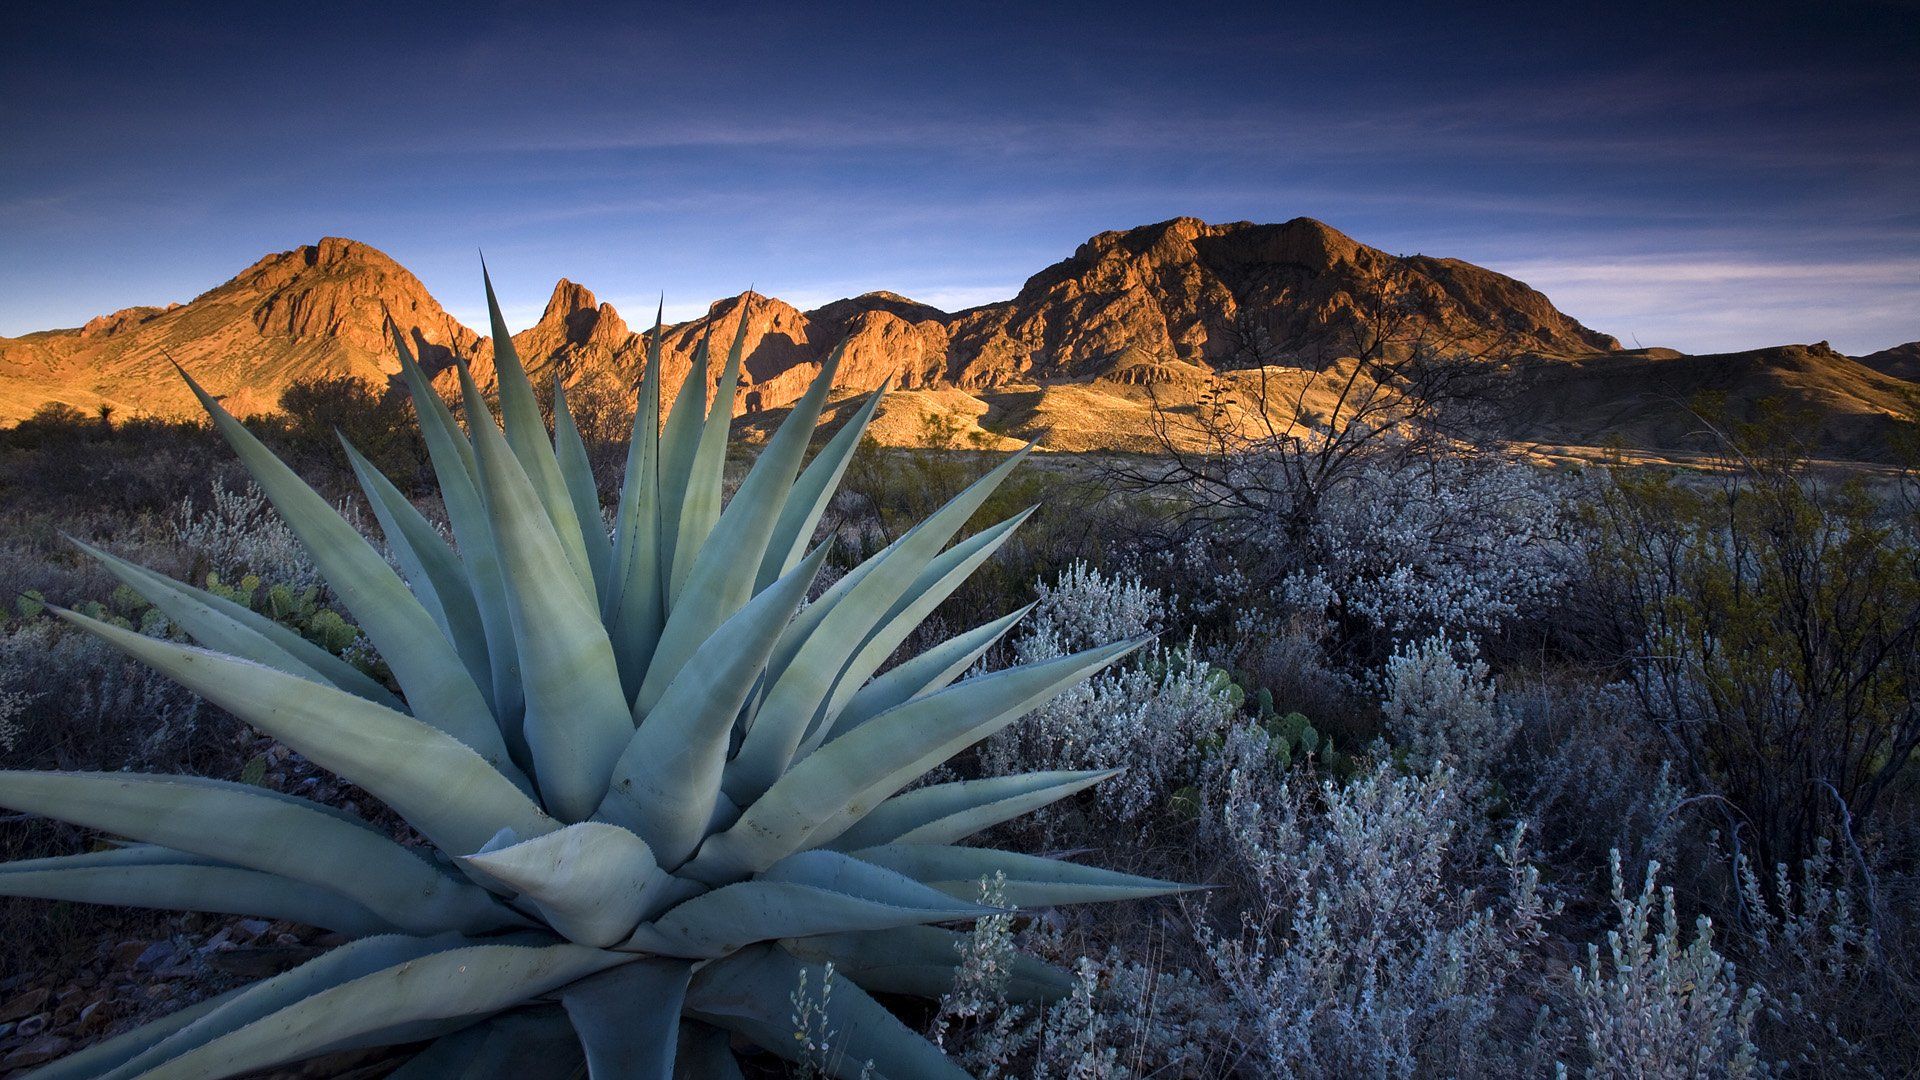 A desert plant with mountains in the background. - Texas